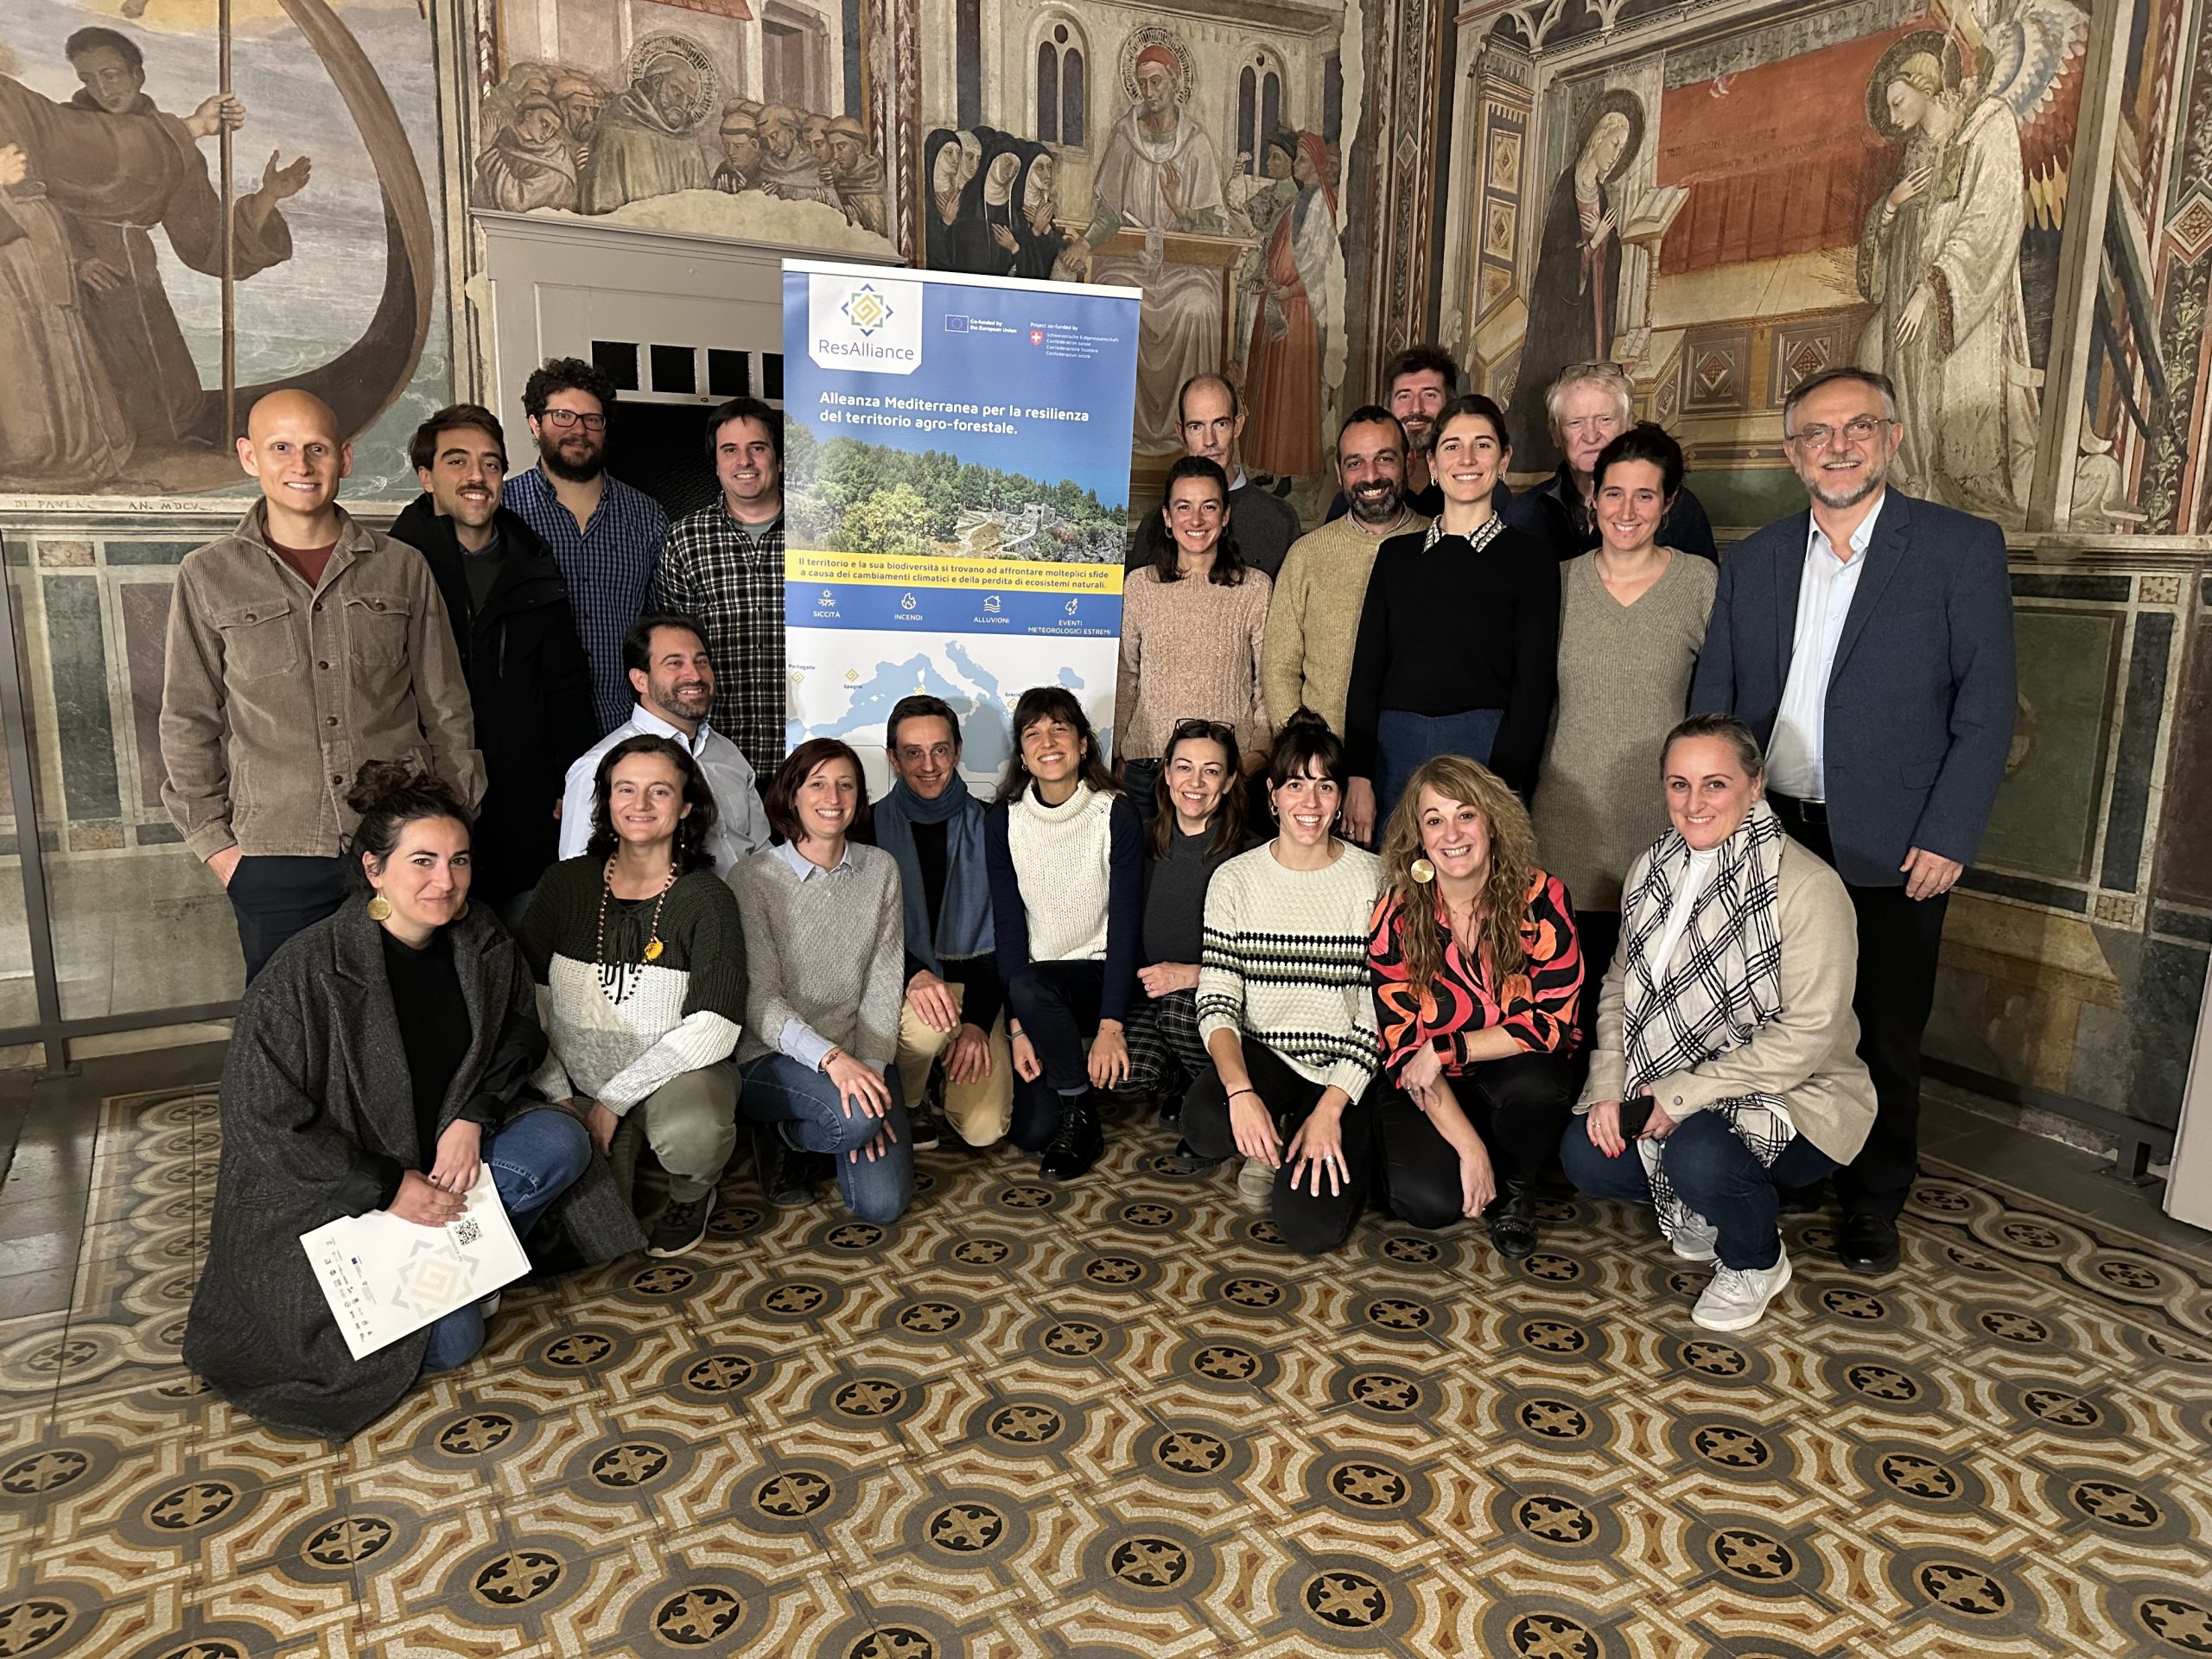 Strengthening Mediterranean Resilience: Insights from ResAlliance’s General Assembly in Florence